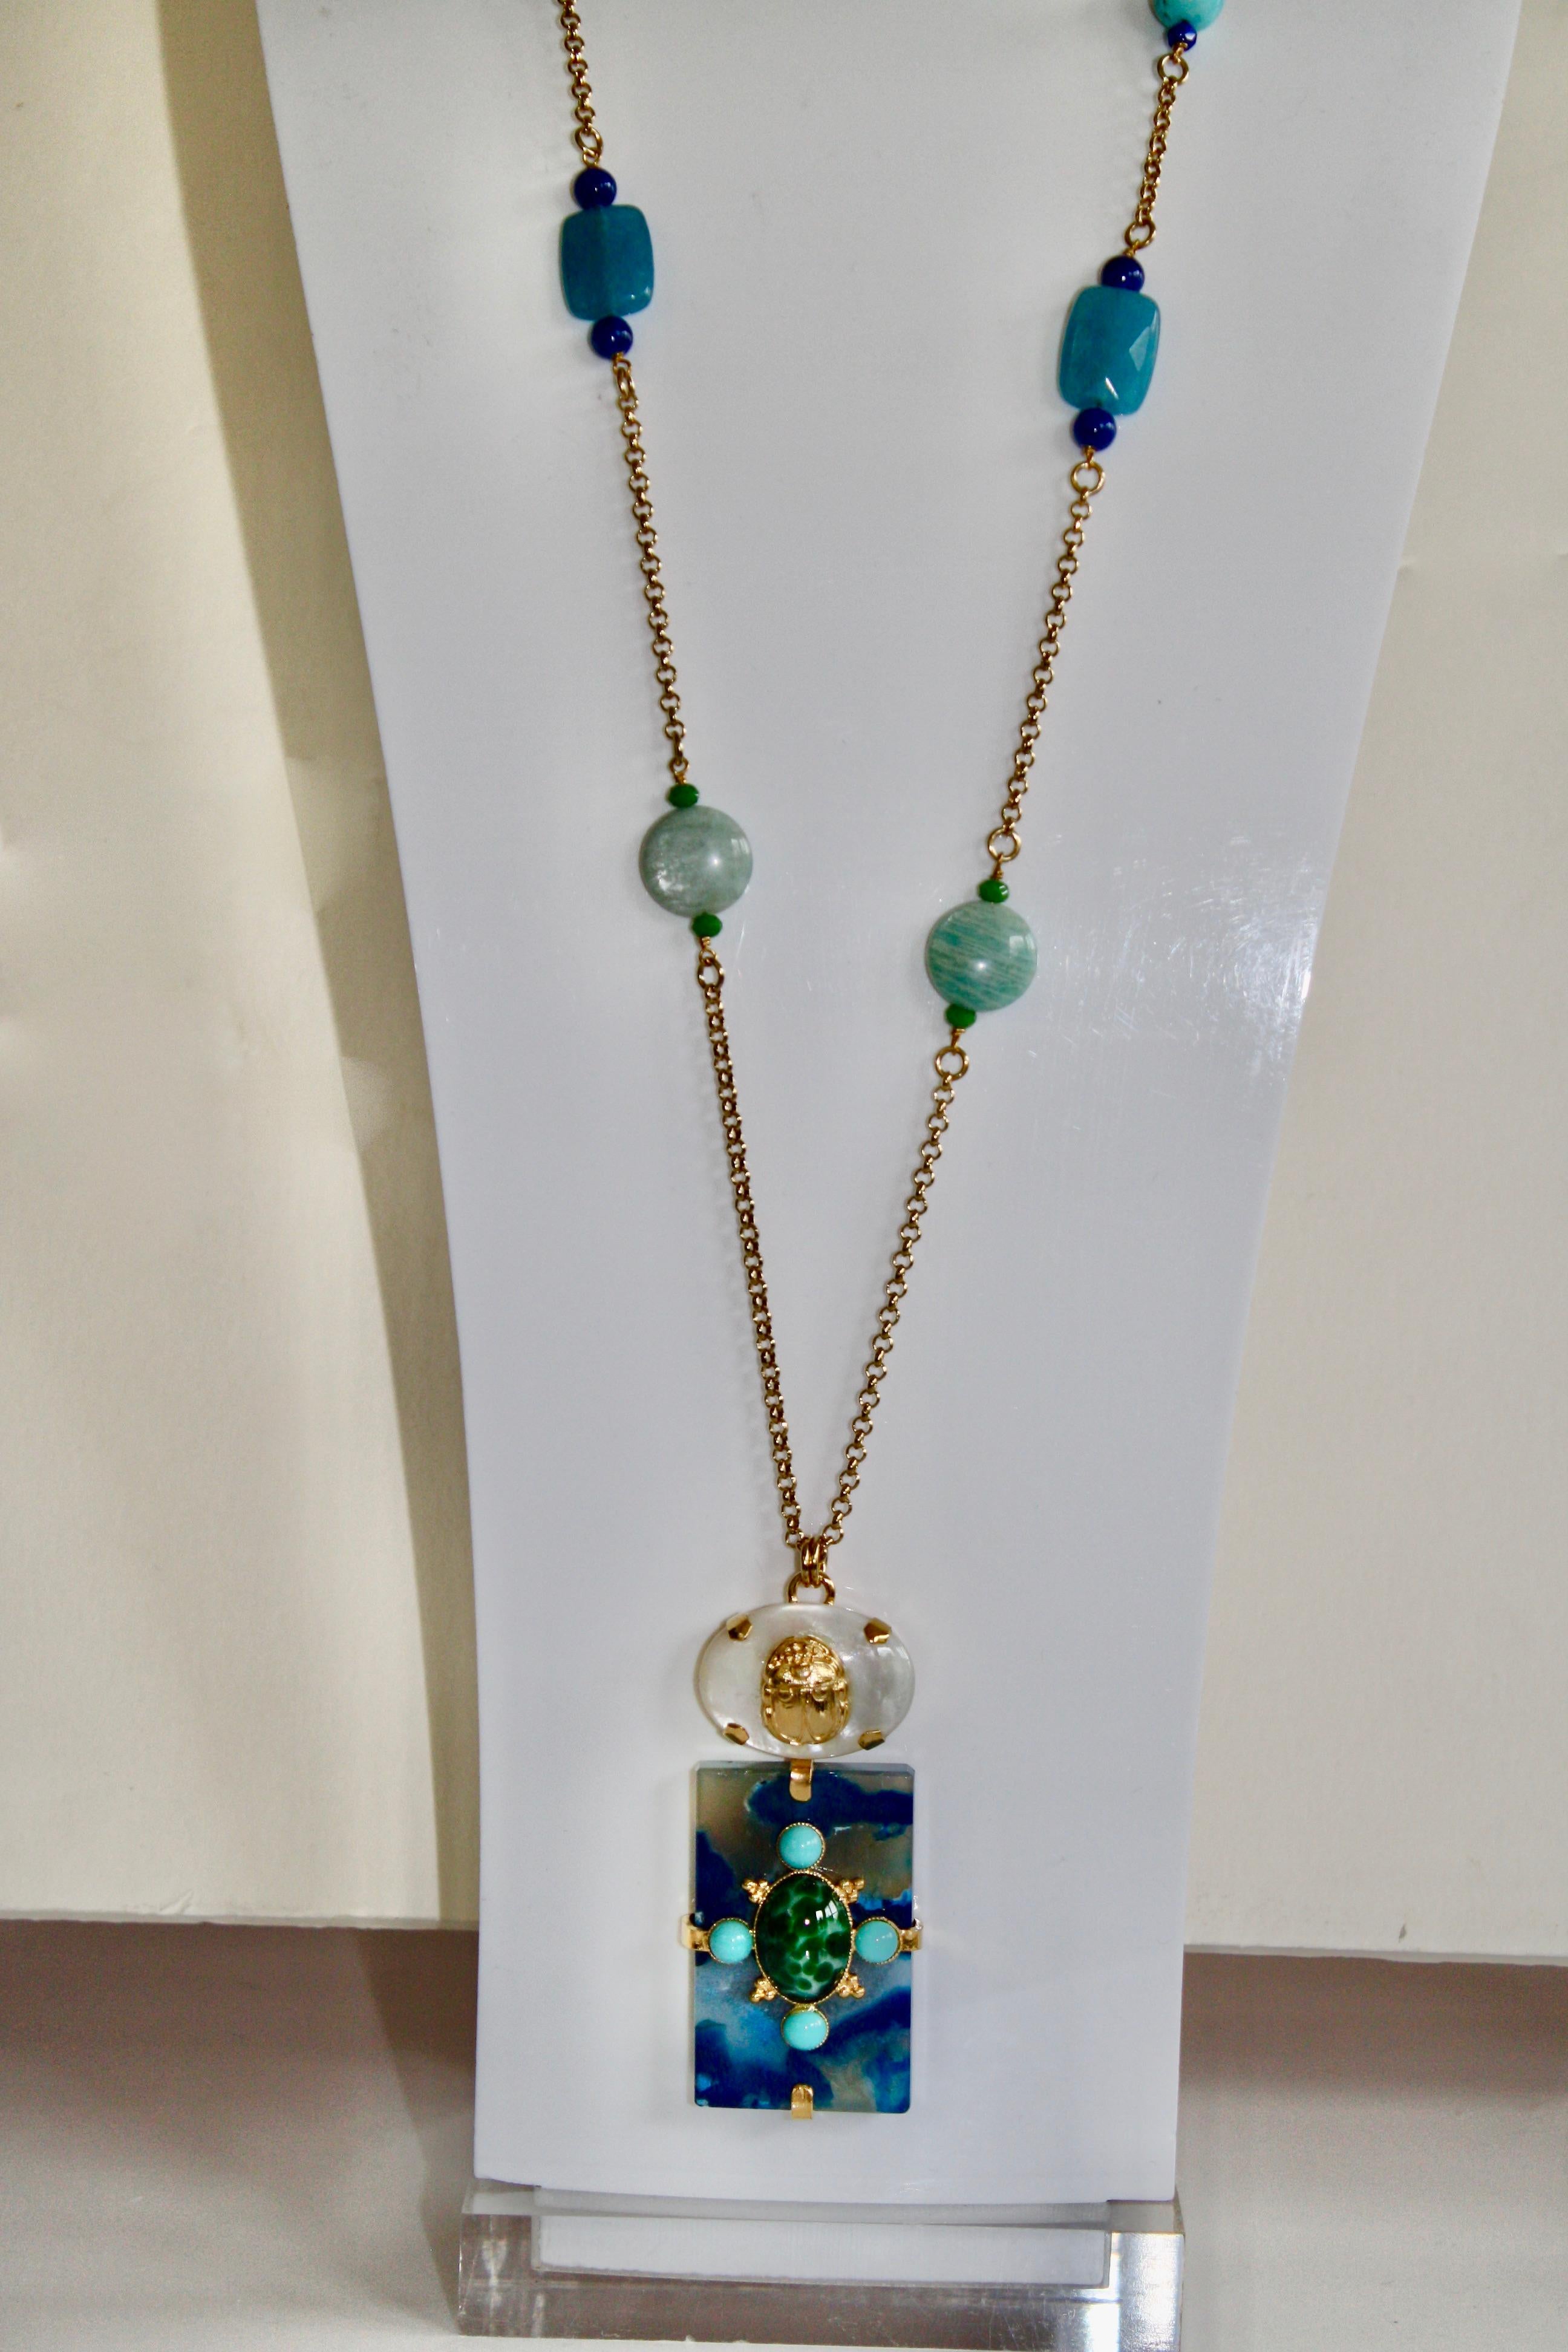 Long chain necklace with turquoise, lapis, and mother of pearl pendant from Philippe Ferrandis. 